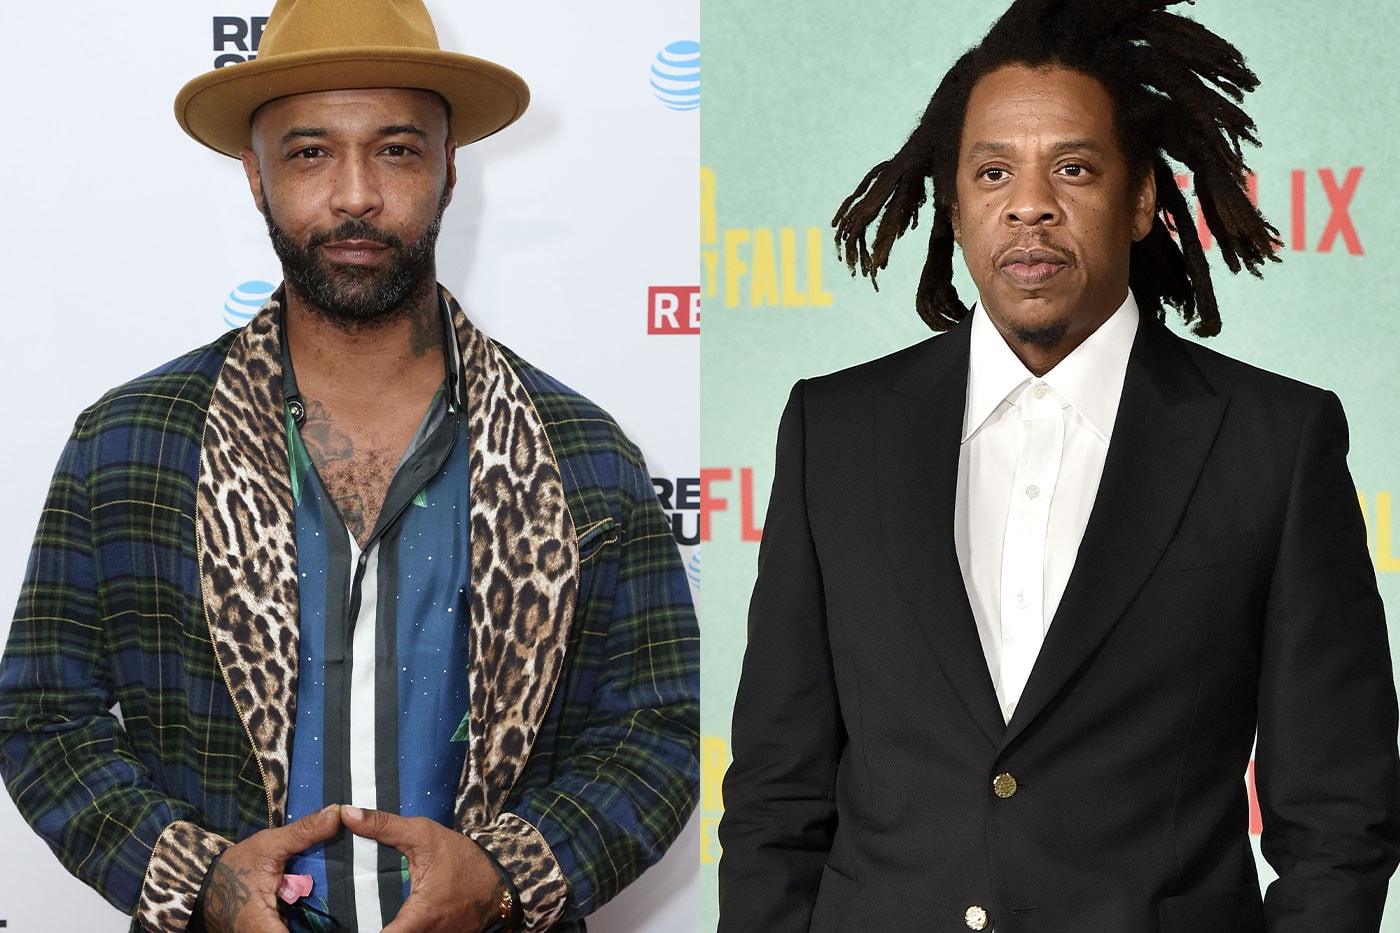 Joe Budden Claims JAY-Z Asked for 250 000 USD Pump It Up Remix